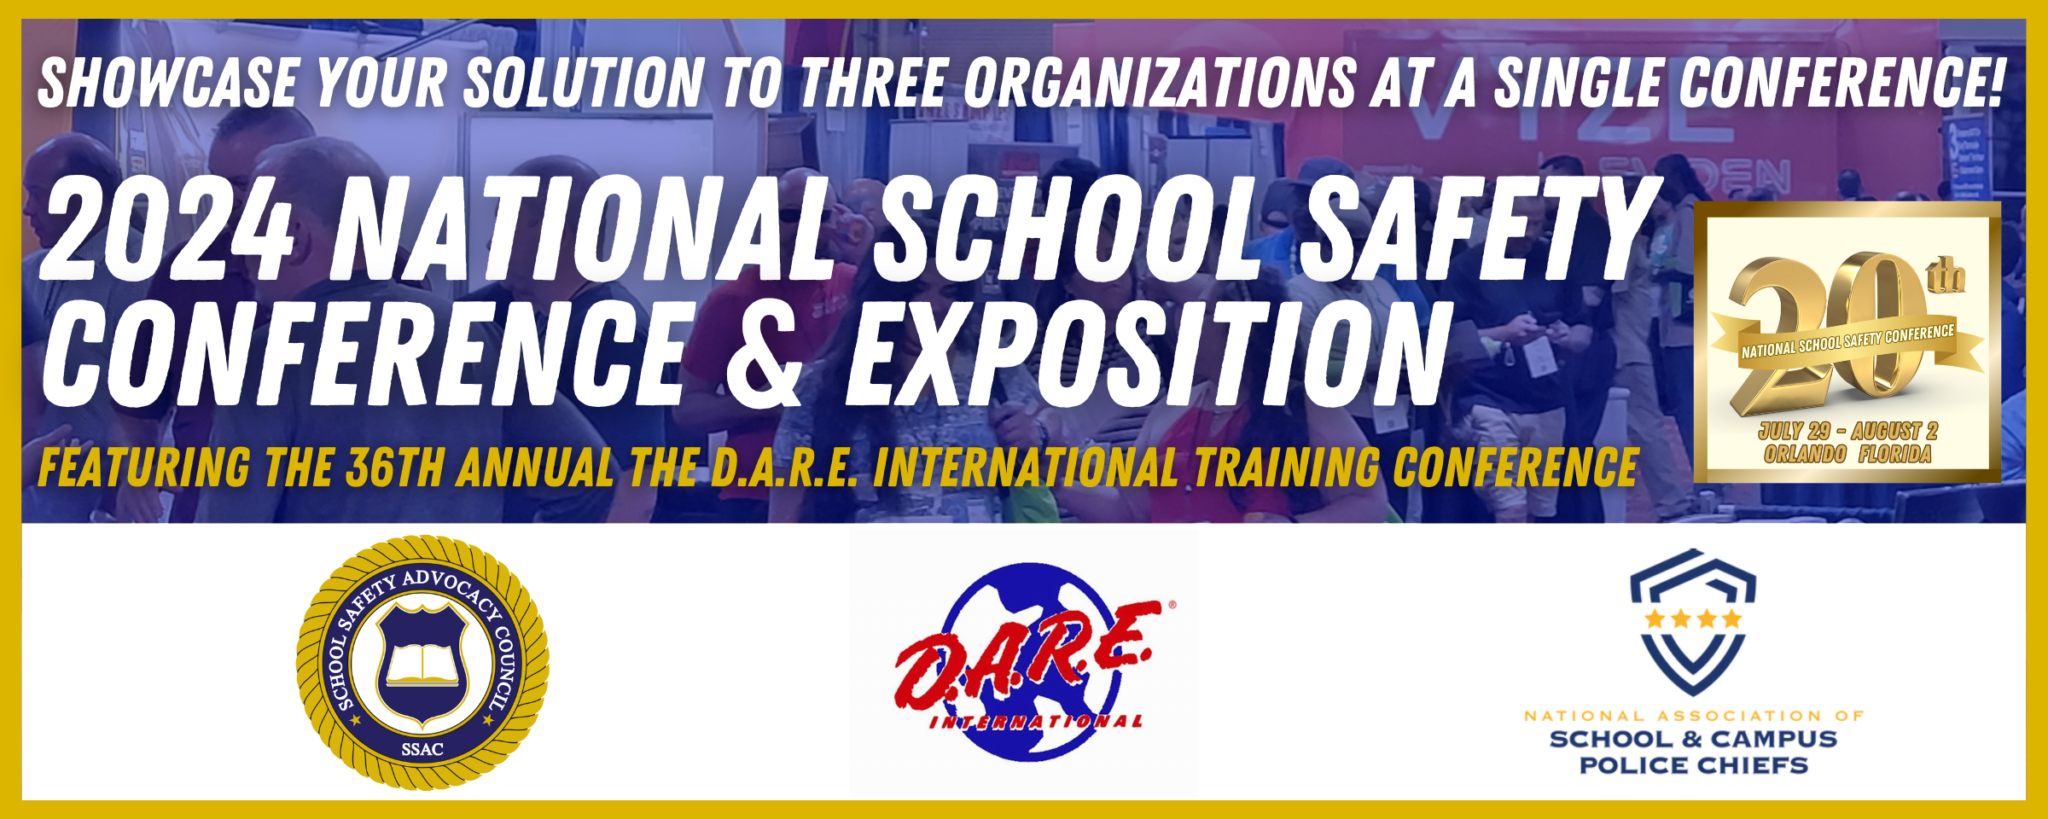 School Safety Conference Exhibitor School Safety Advocacy Council